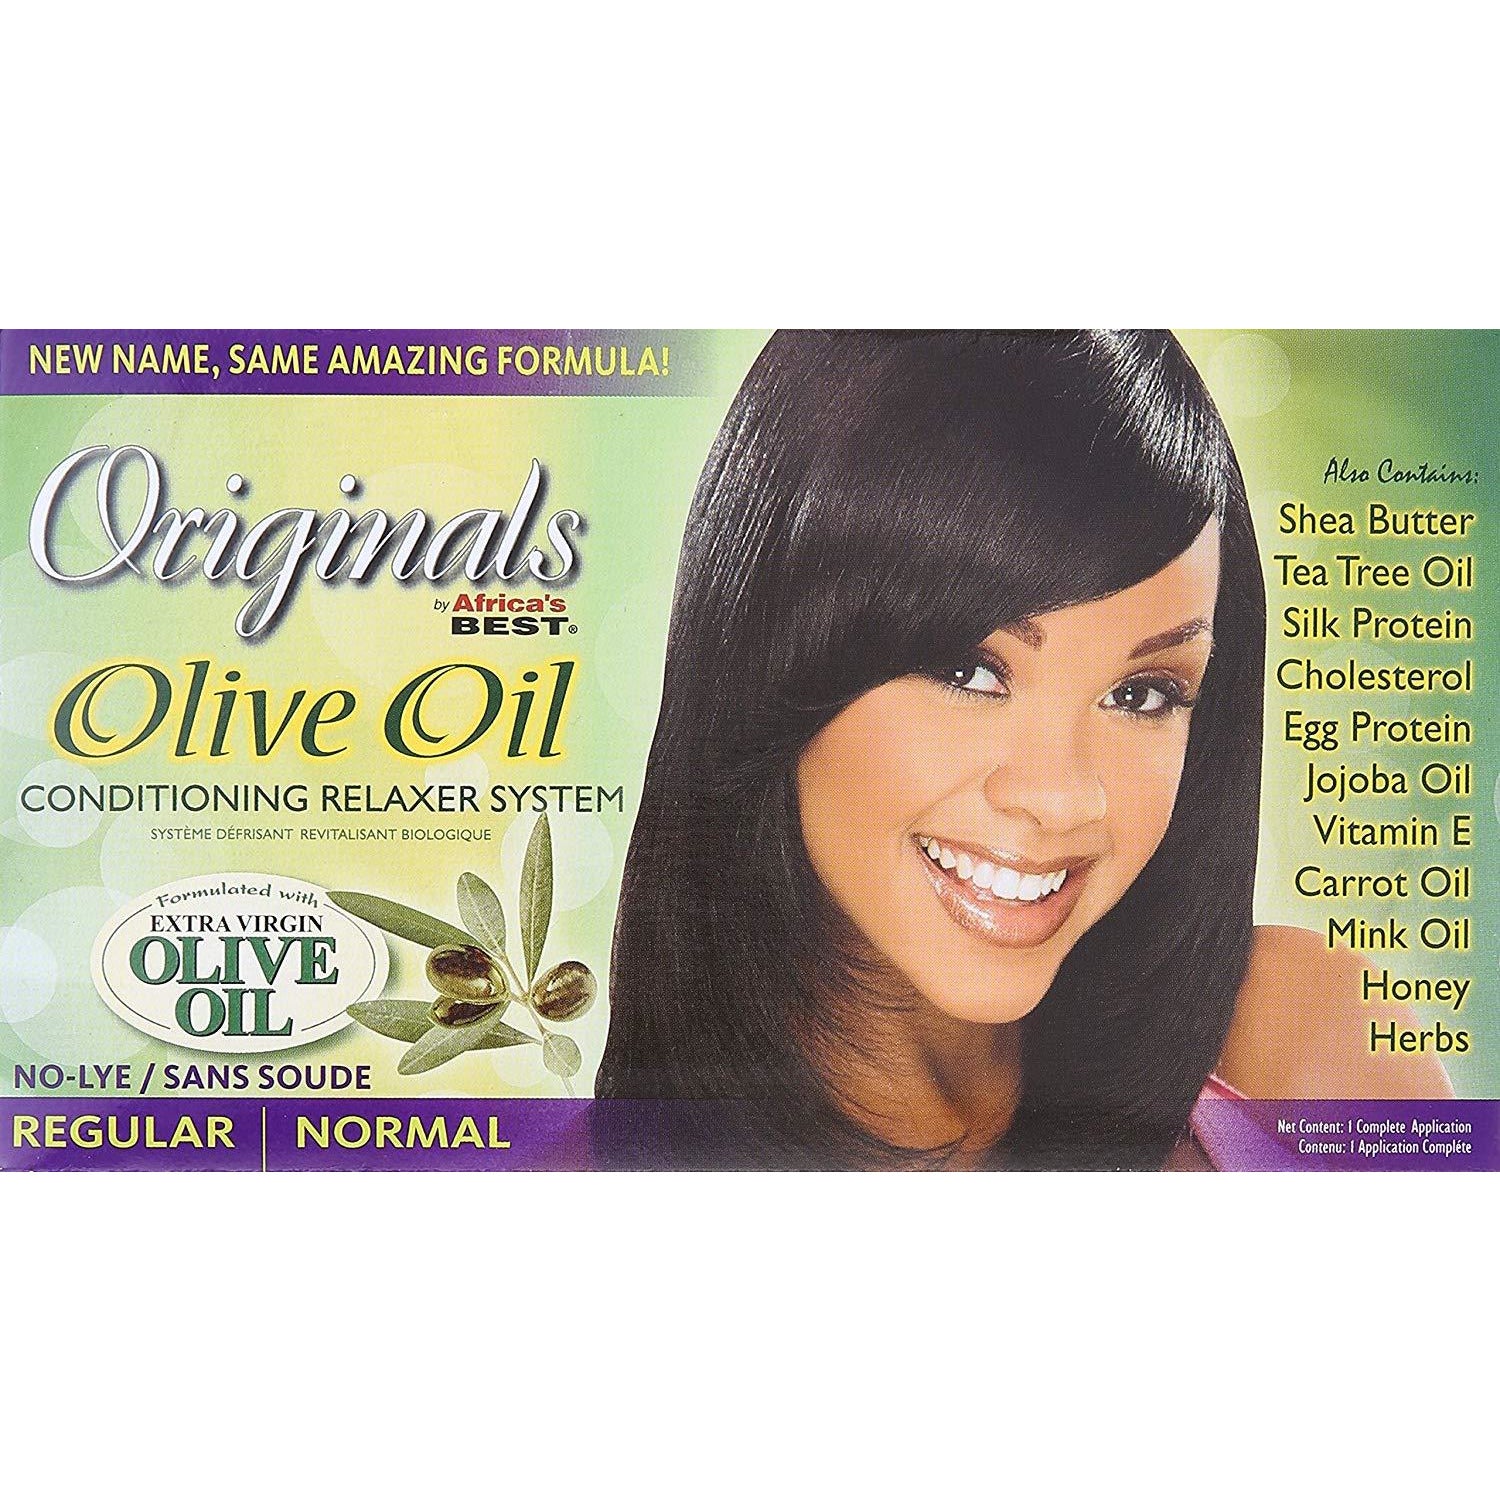 4th Ave Market: Africa's Best Originals Olive Oil Conditioning Relaxer System, No Lye - Regular/Norm